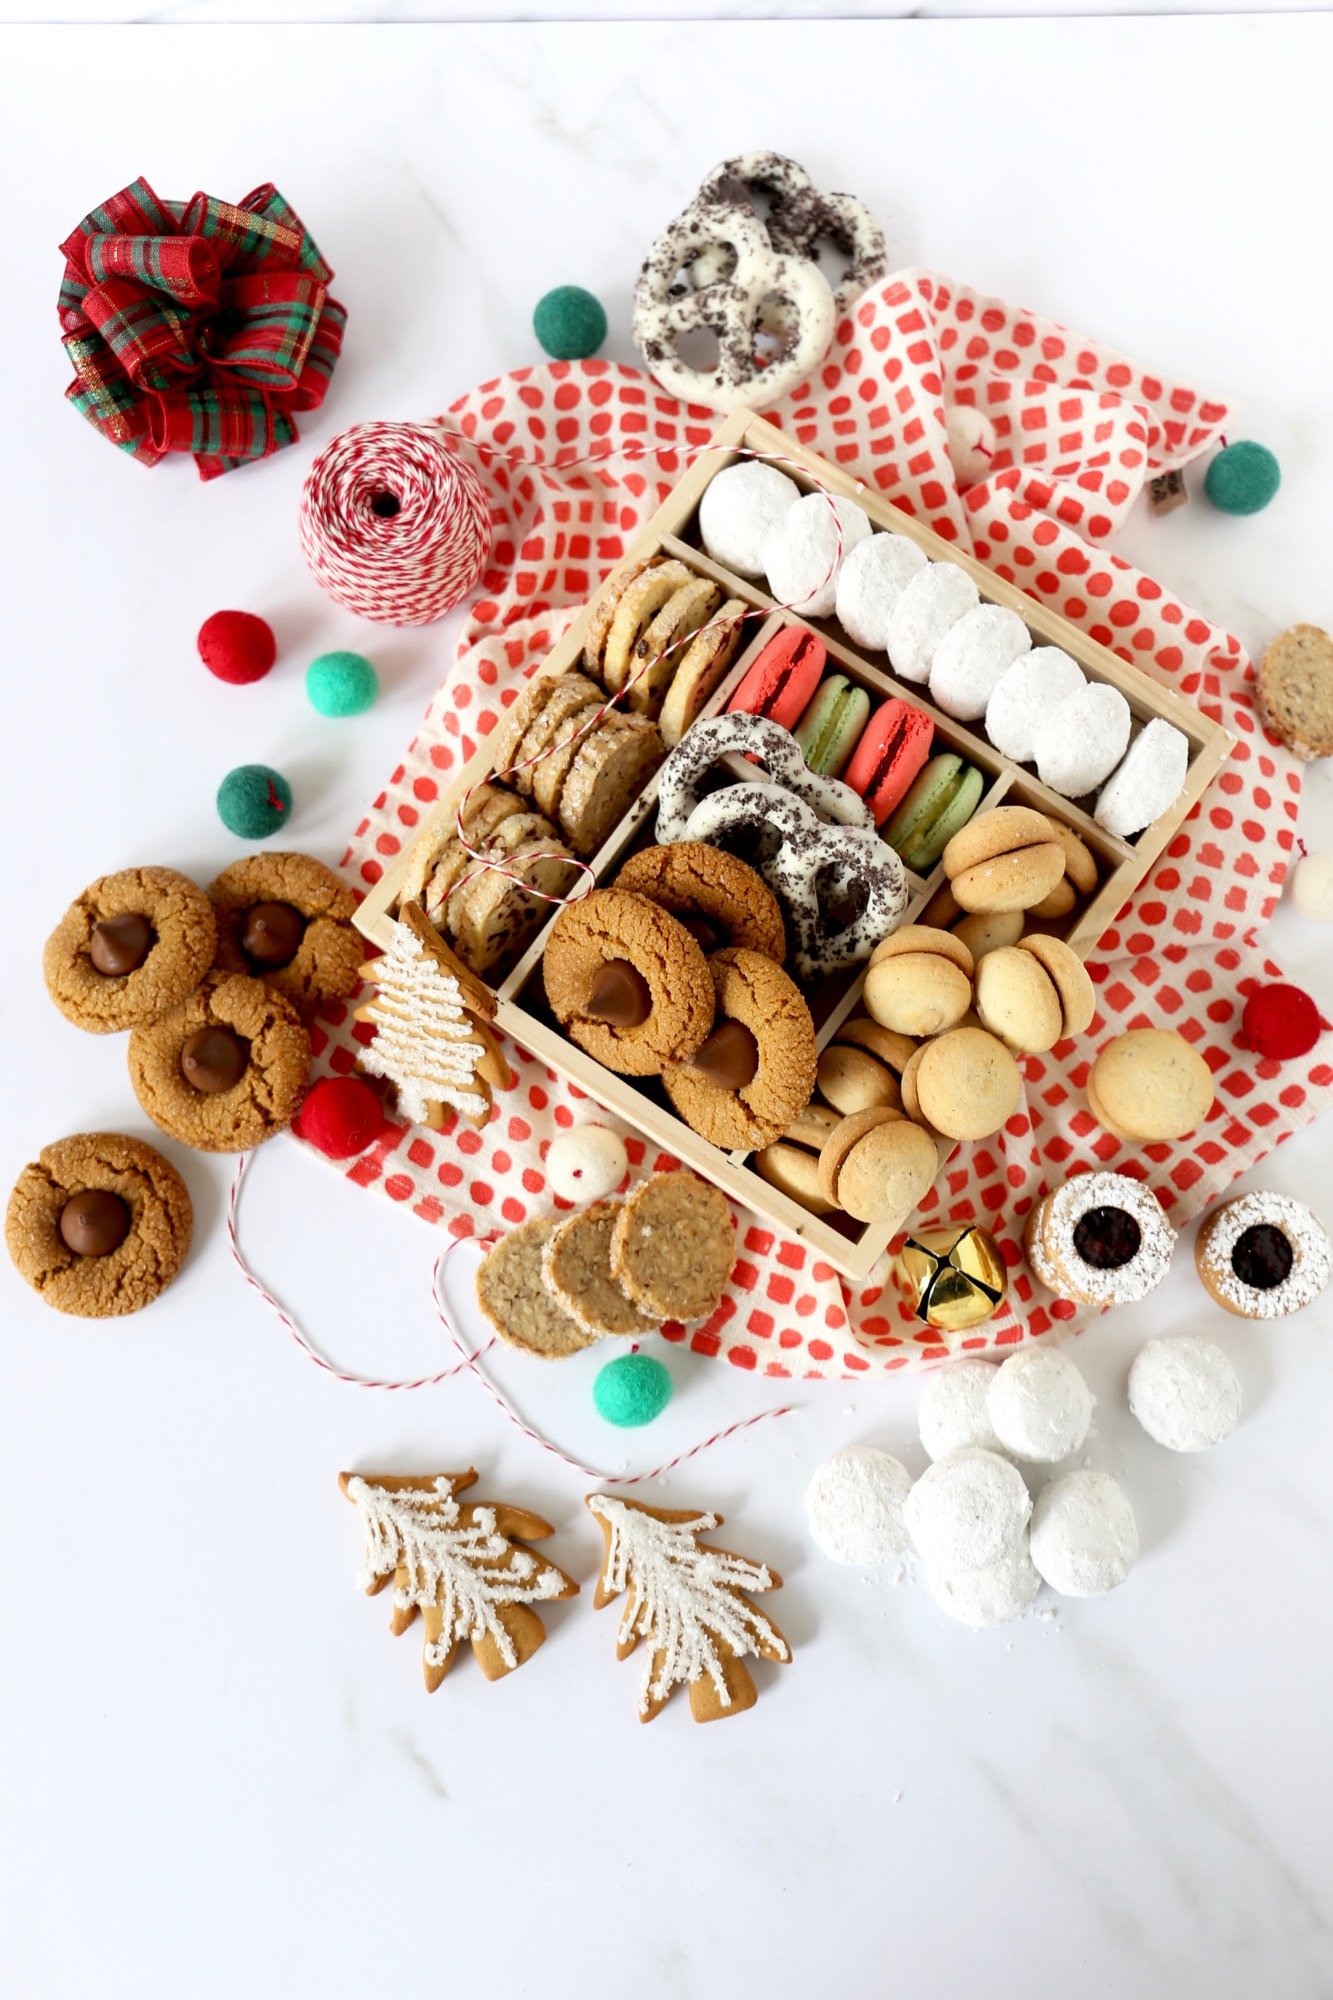 Homemade Holiday Cookie Gifts | Joy + Oliver